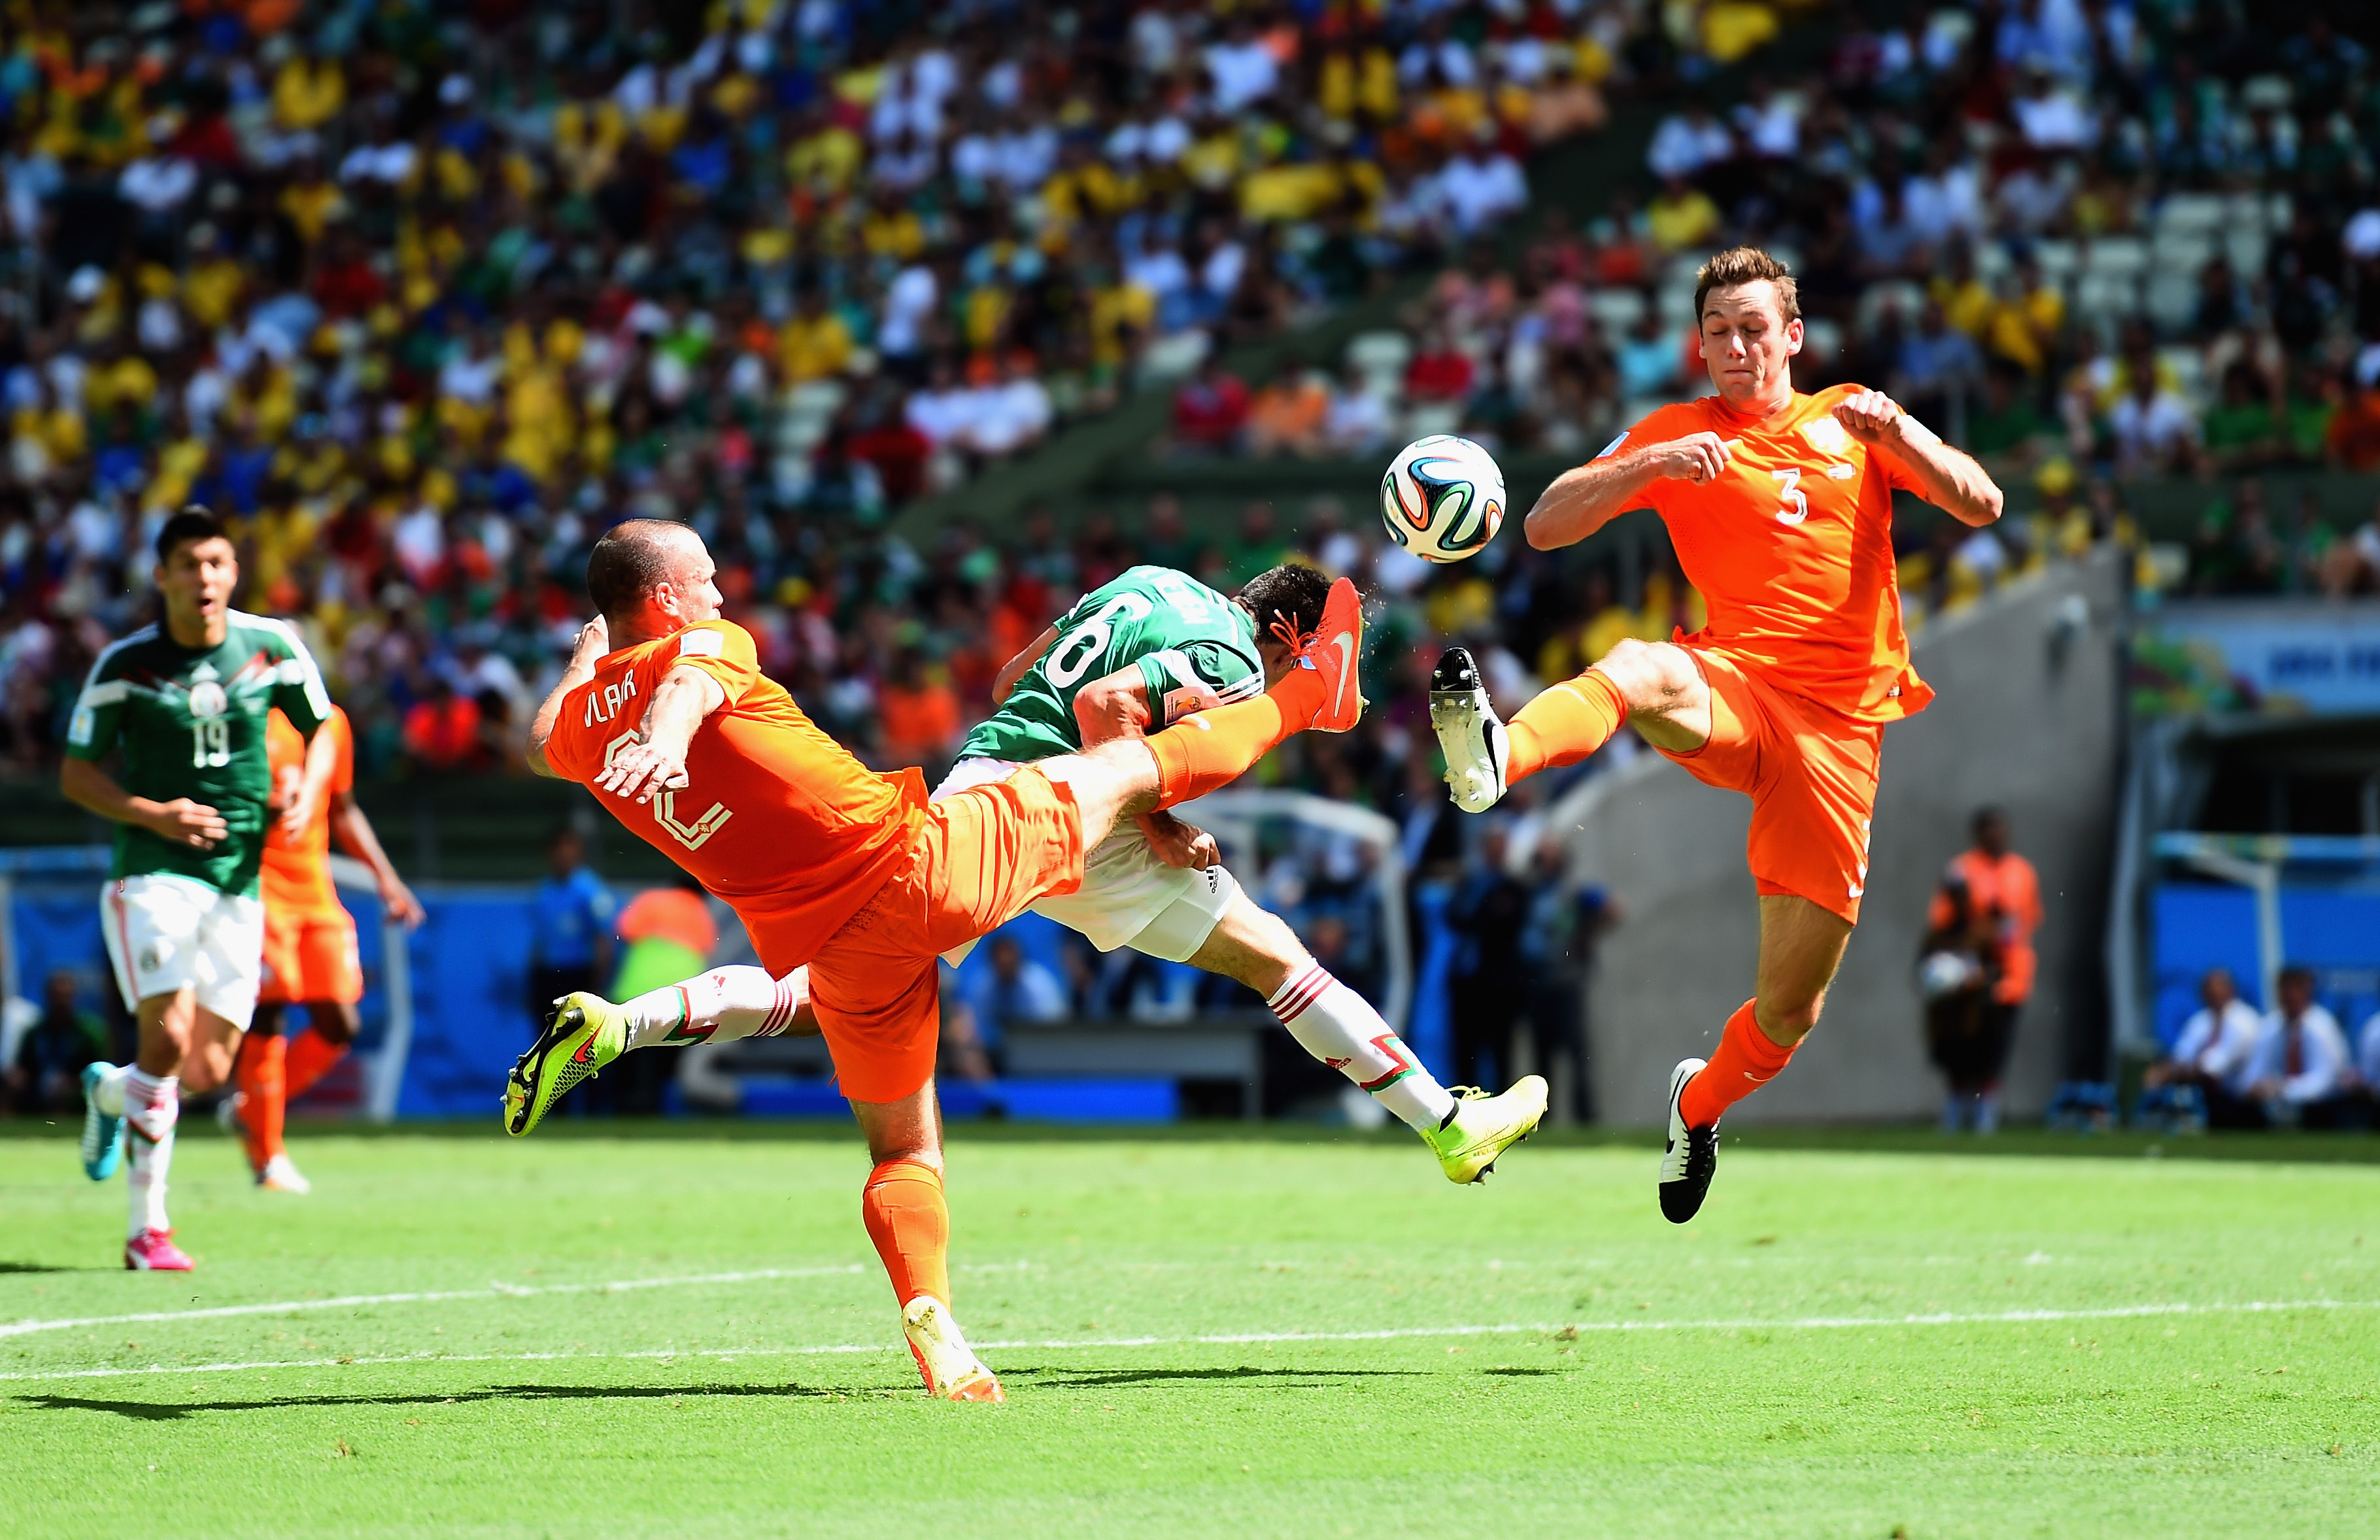 Ron Vlaar and Stefan De Vrij of Netherlands battles with Hector Herrera of Mexico during the 2014 FIFA World Cup on June 29 in Fortaleza, Brazil. (Laurence Griffiths—Getty Images)